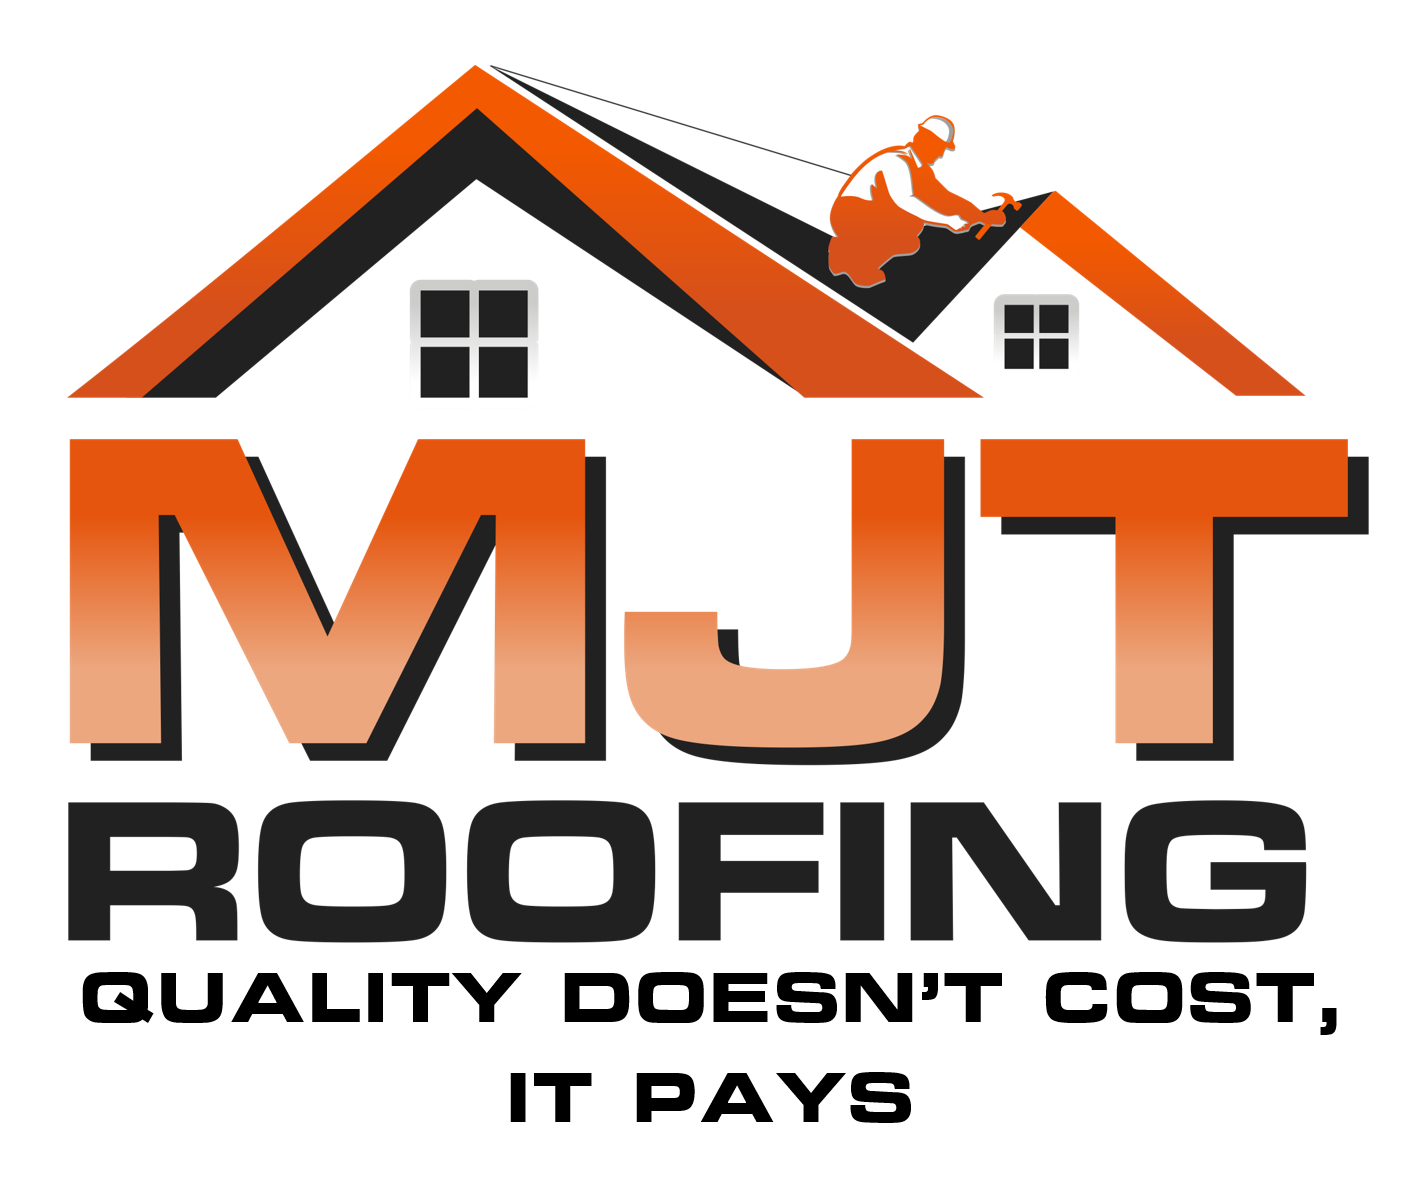 MJT Roofing located in Willimantic, CT